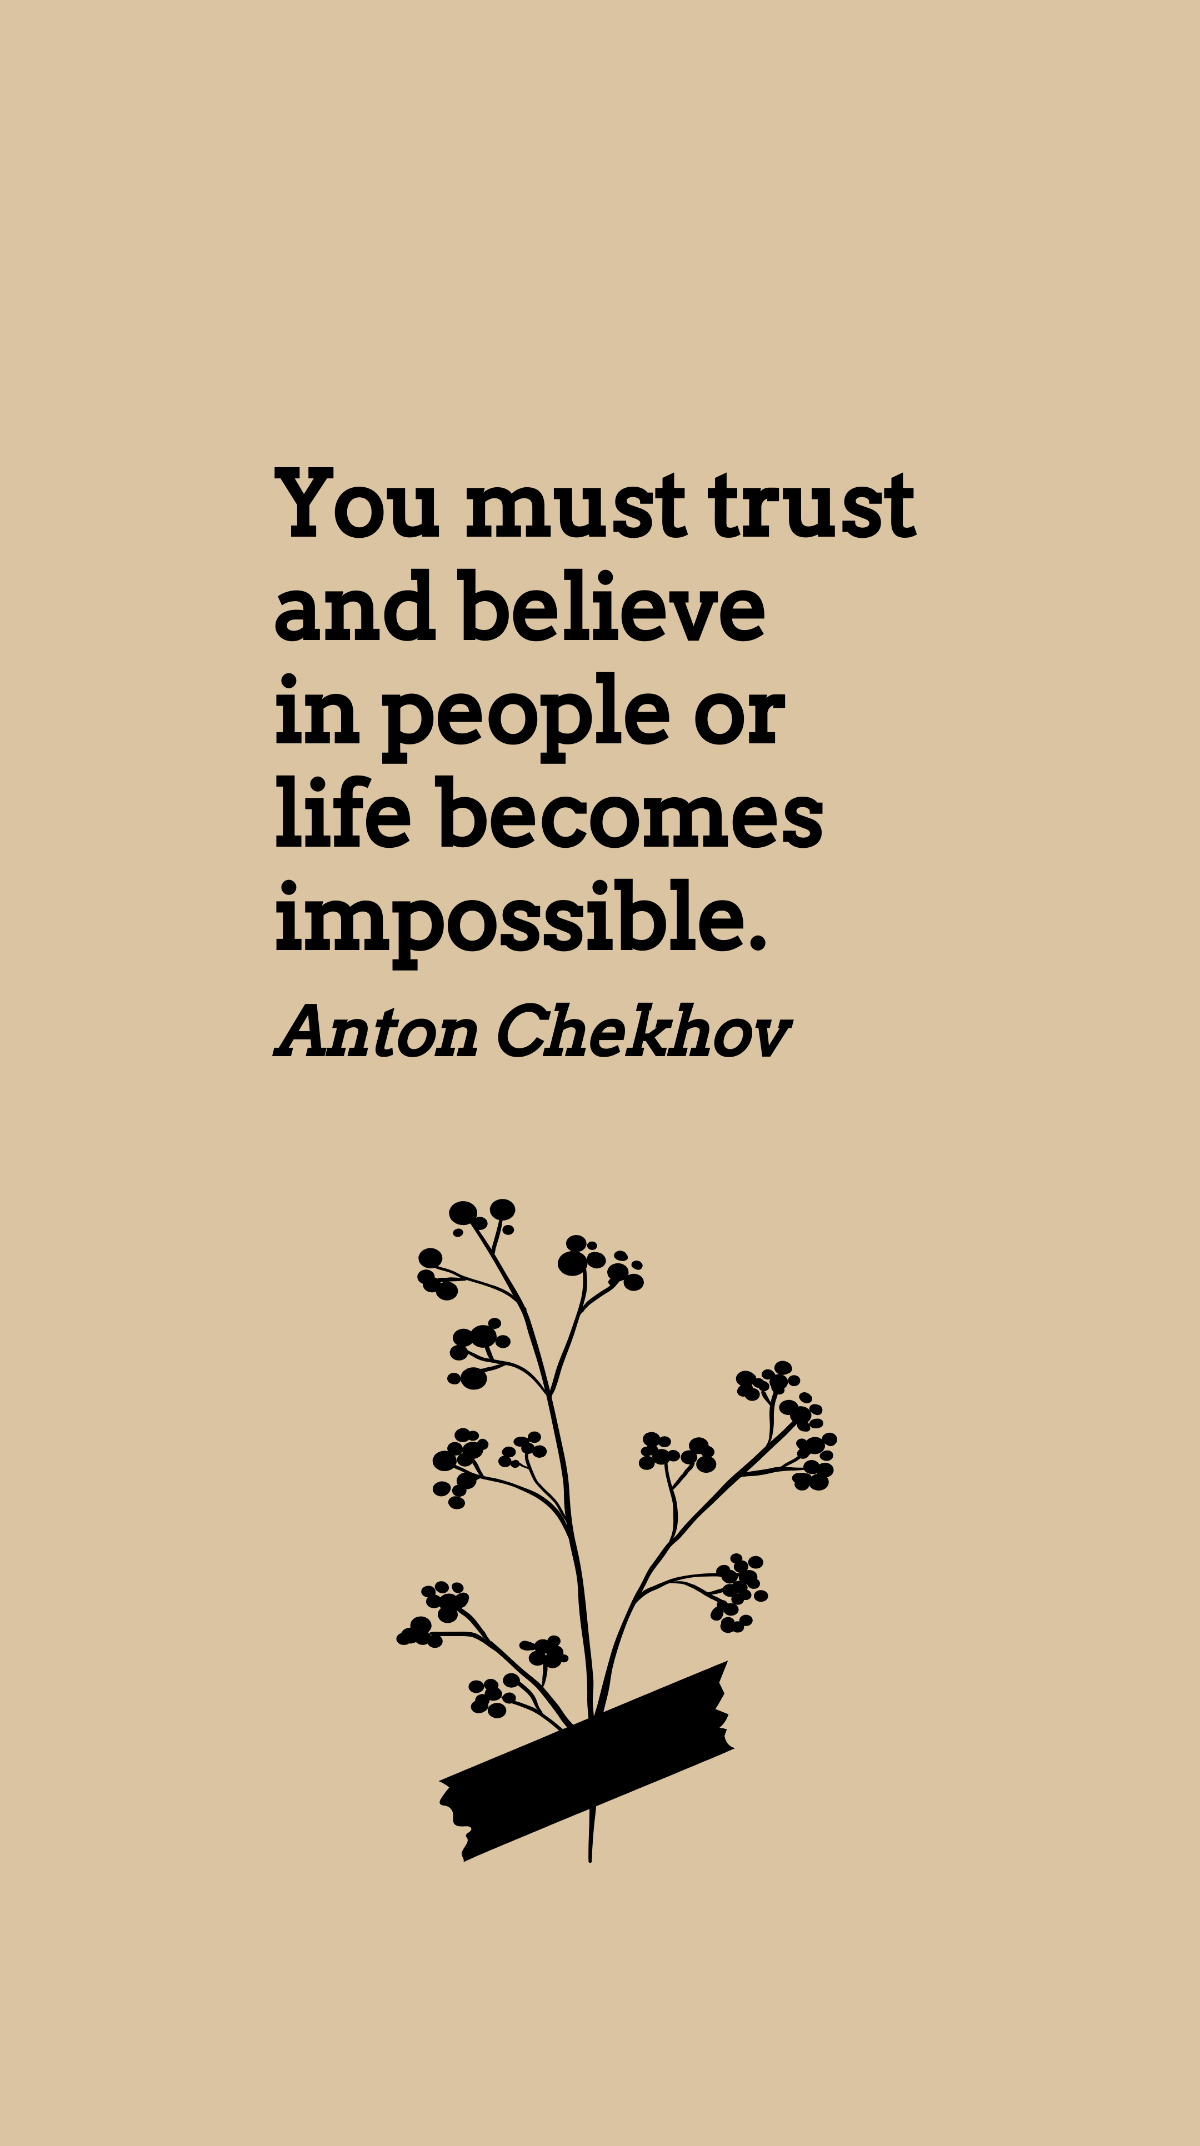 Anton Chekhov - You must trust and believe in people or life becomes impossible.